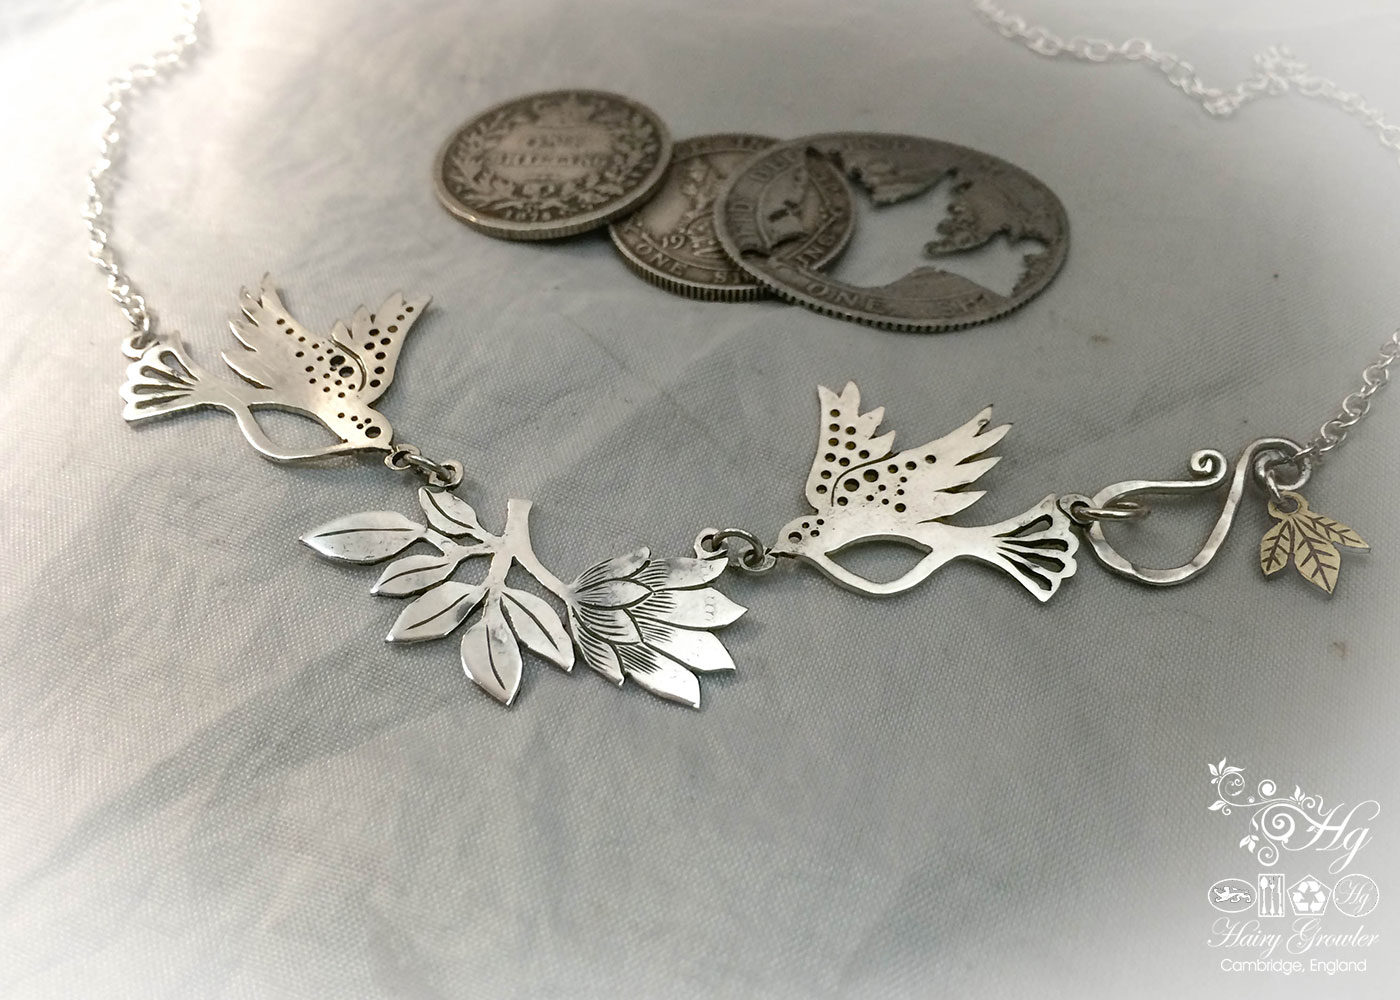 Hand made and repurposed sterling silver beautiful sparkling doves and lotus flower necklace made from silver shillings